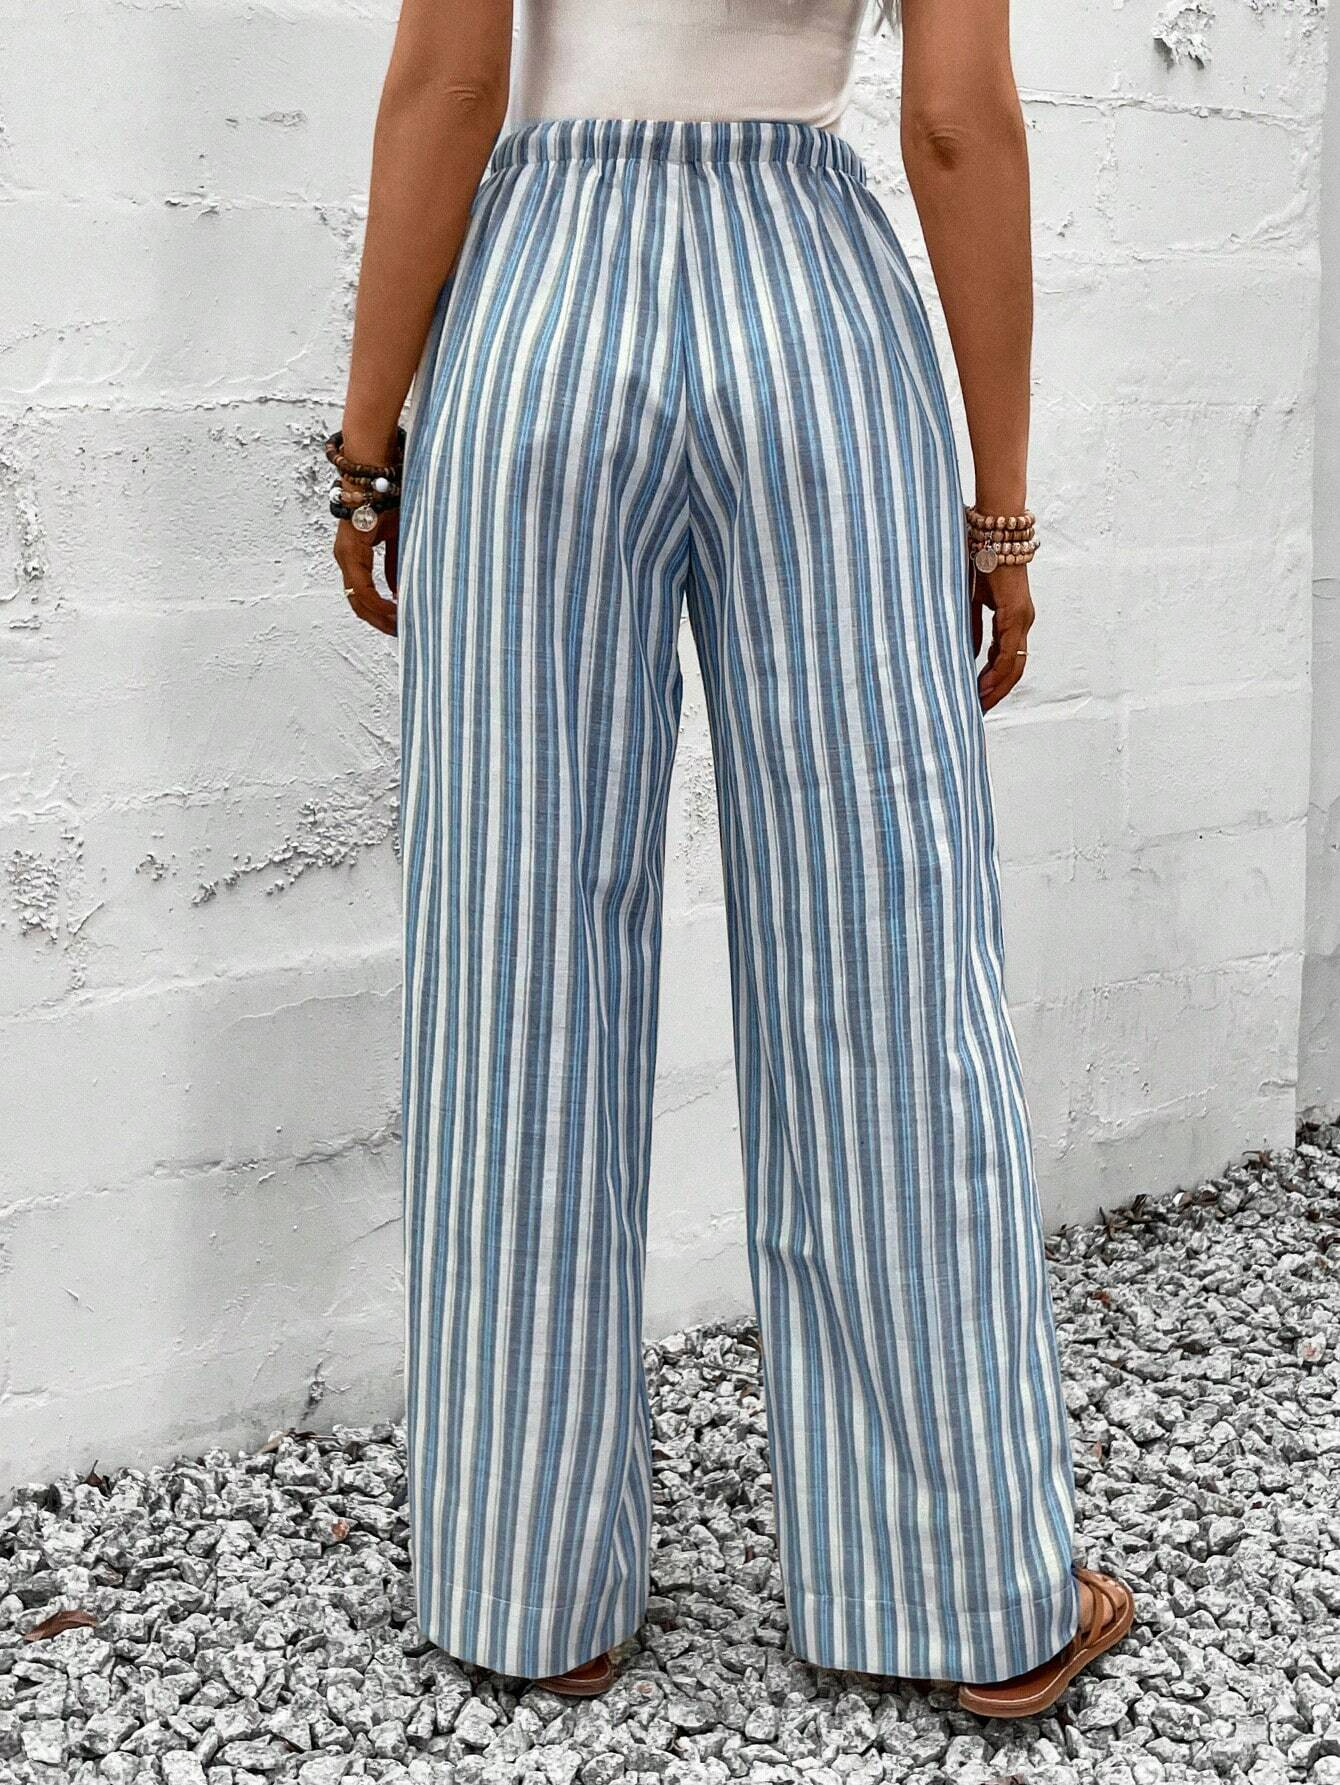 Women's  Elastic Band H-Line Wide Leg Pants Daily Pant Blue Casual Drawstring Striped Pant